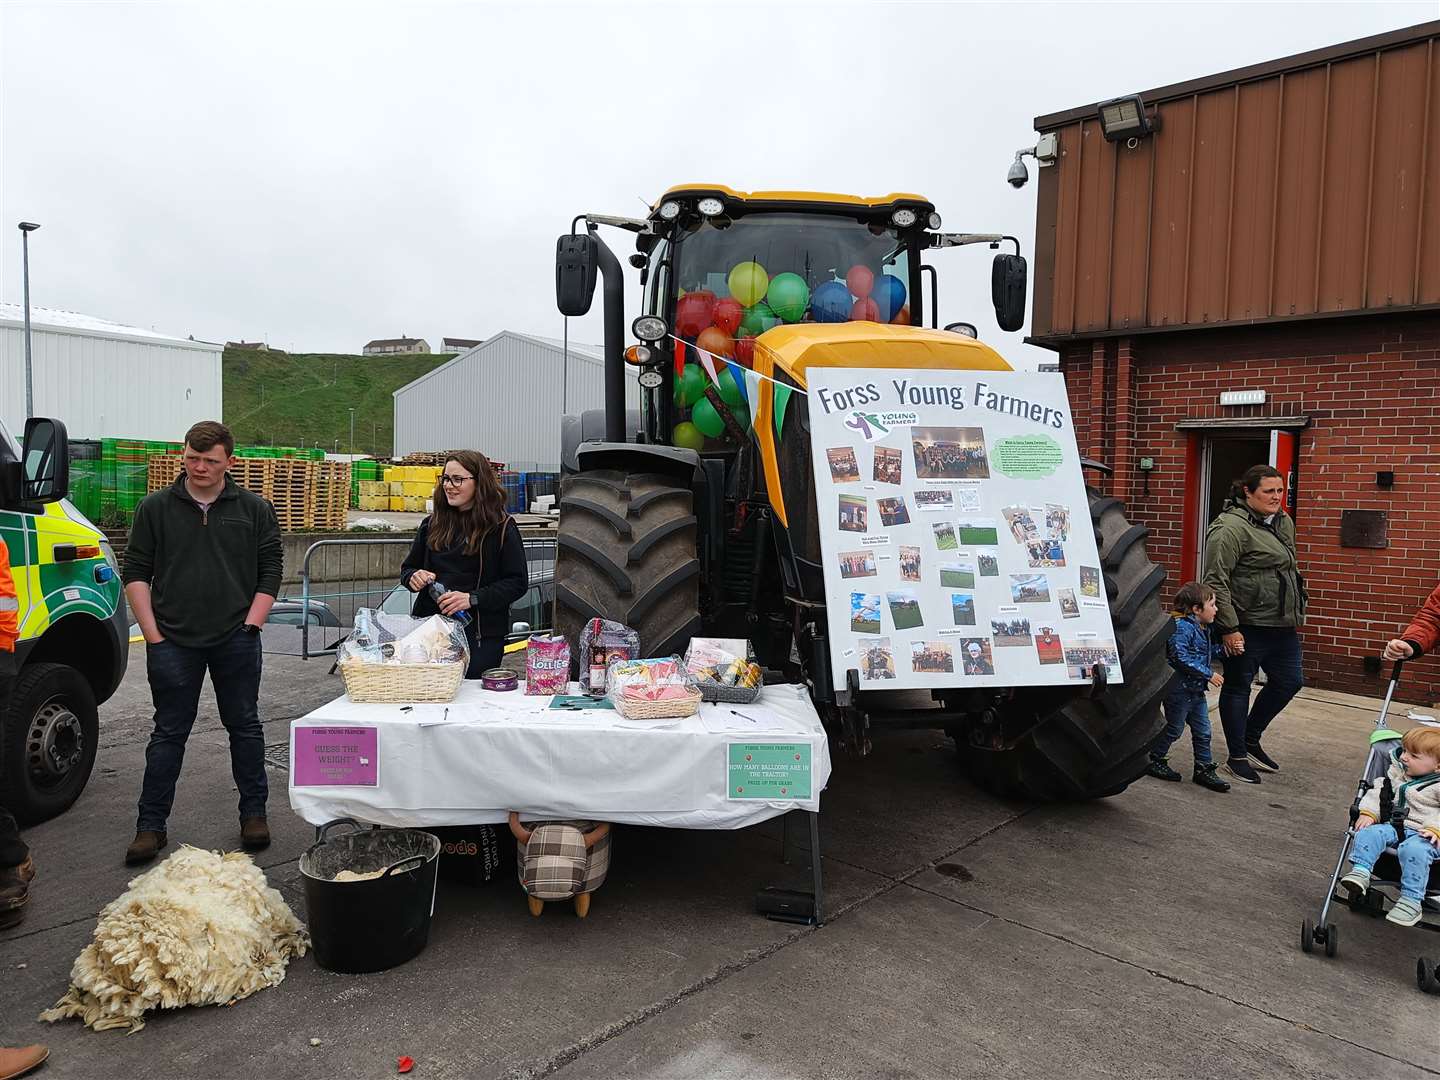 Forss Young Farmers had a competition to guess the number of balloons in a tractor.